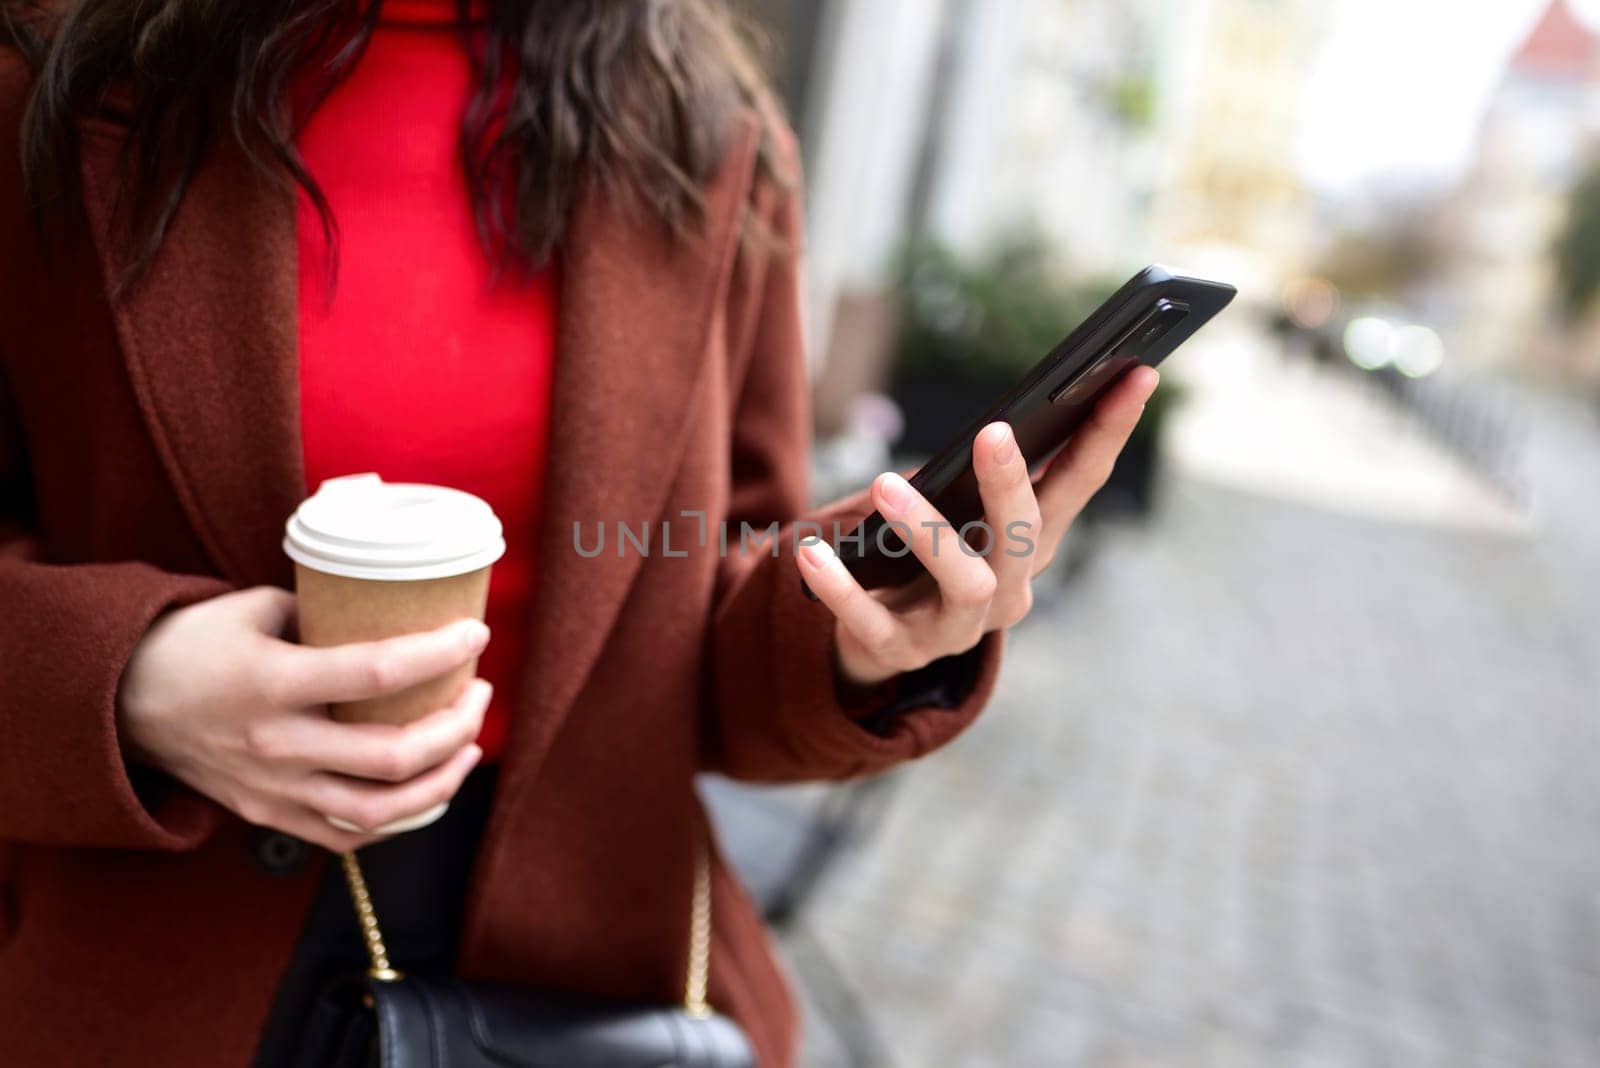 smartphone in woman's hand in the background of the street.